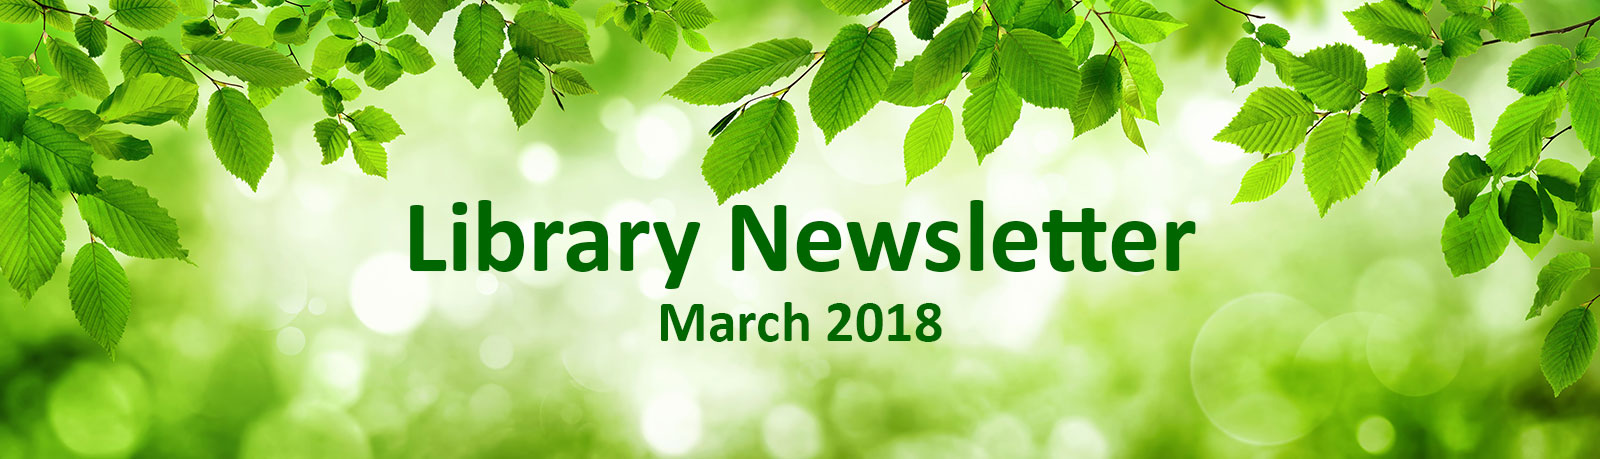 Library Newsletter - March 2018